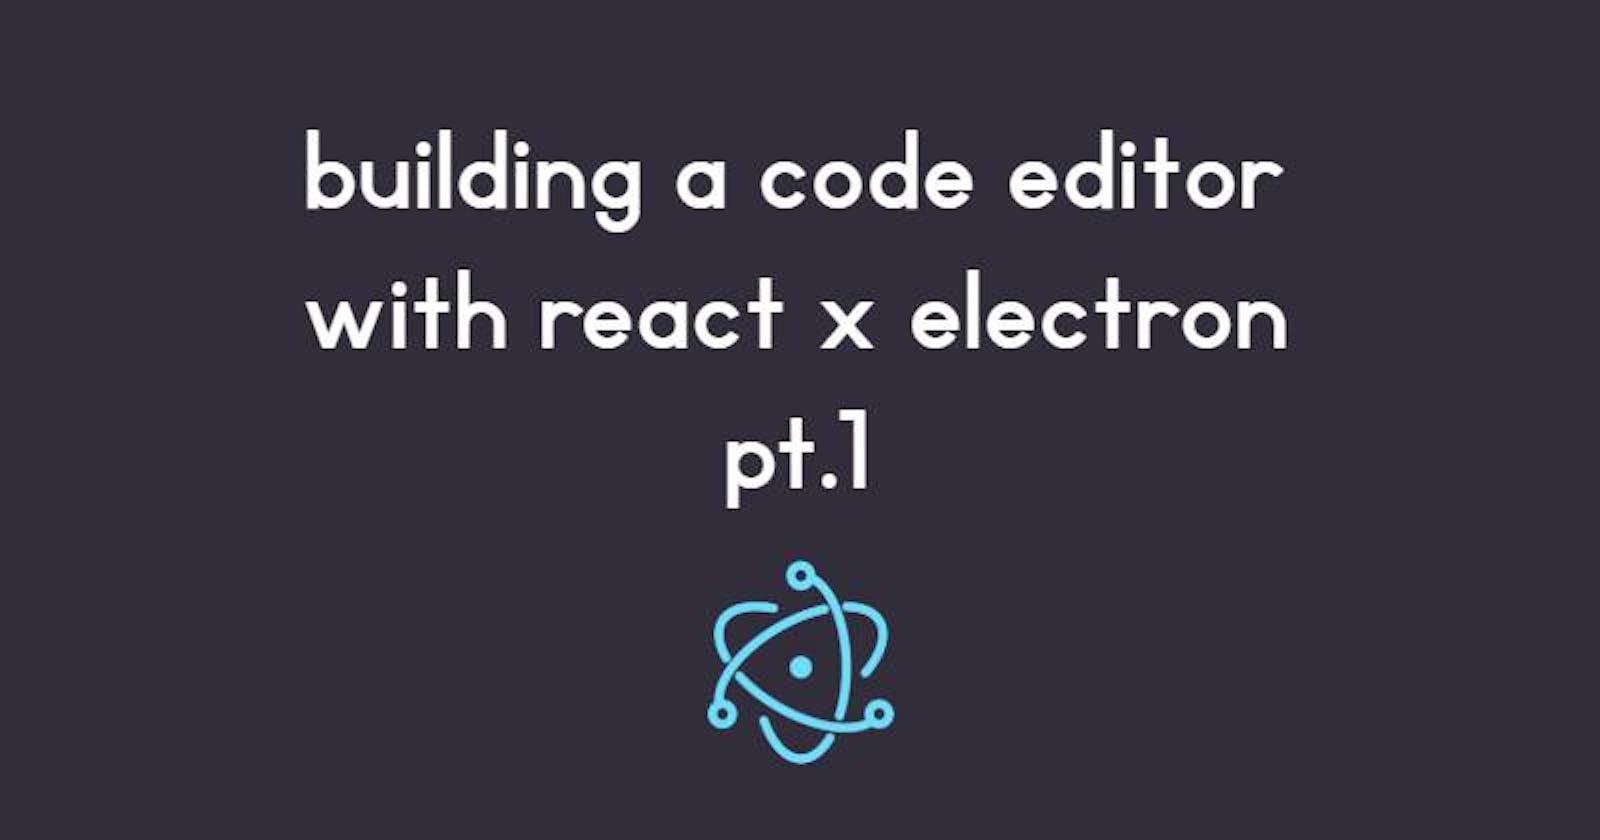 Building a react x electron code editor pt.1 - Setting up with npm and electron